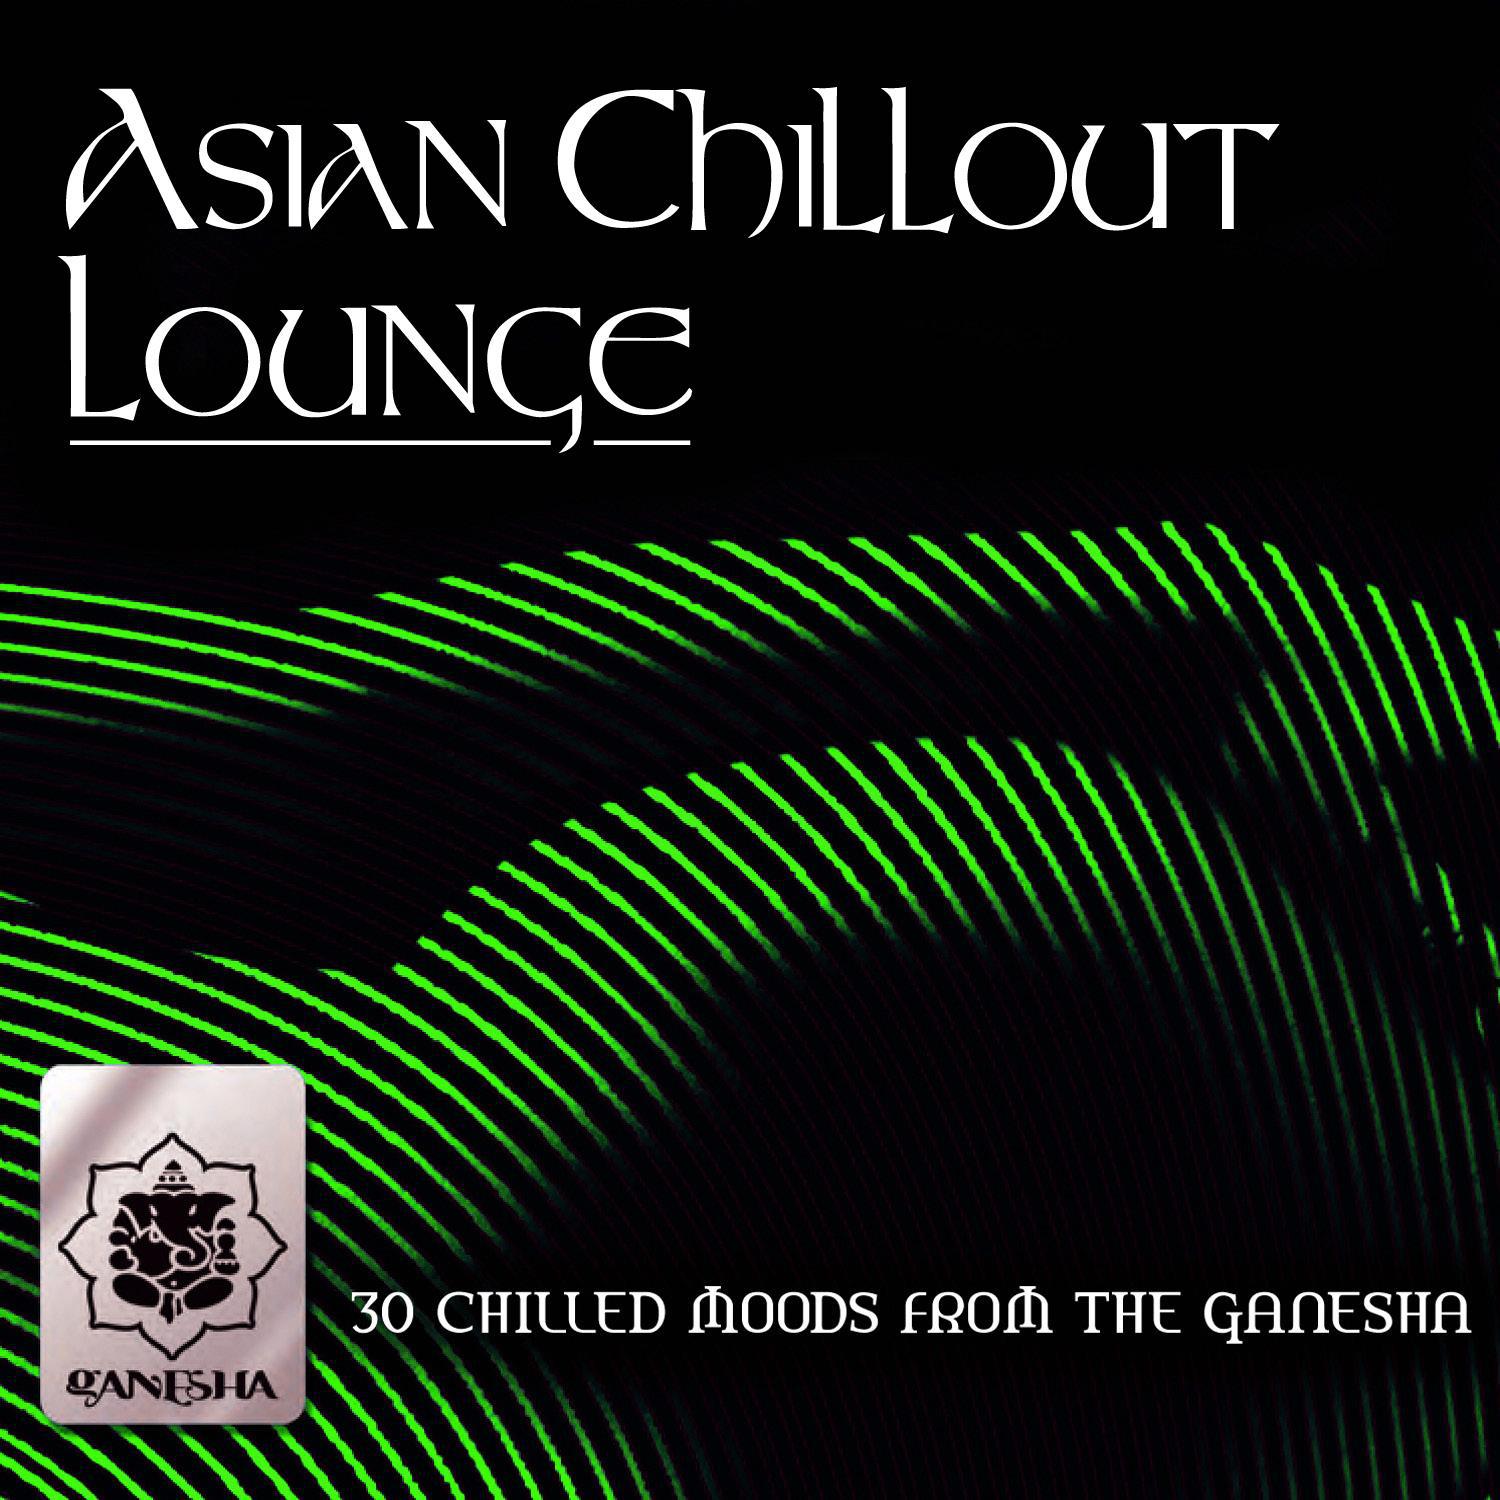 Asian Chillout Lounge